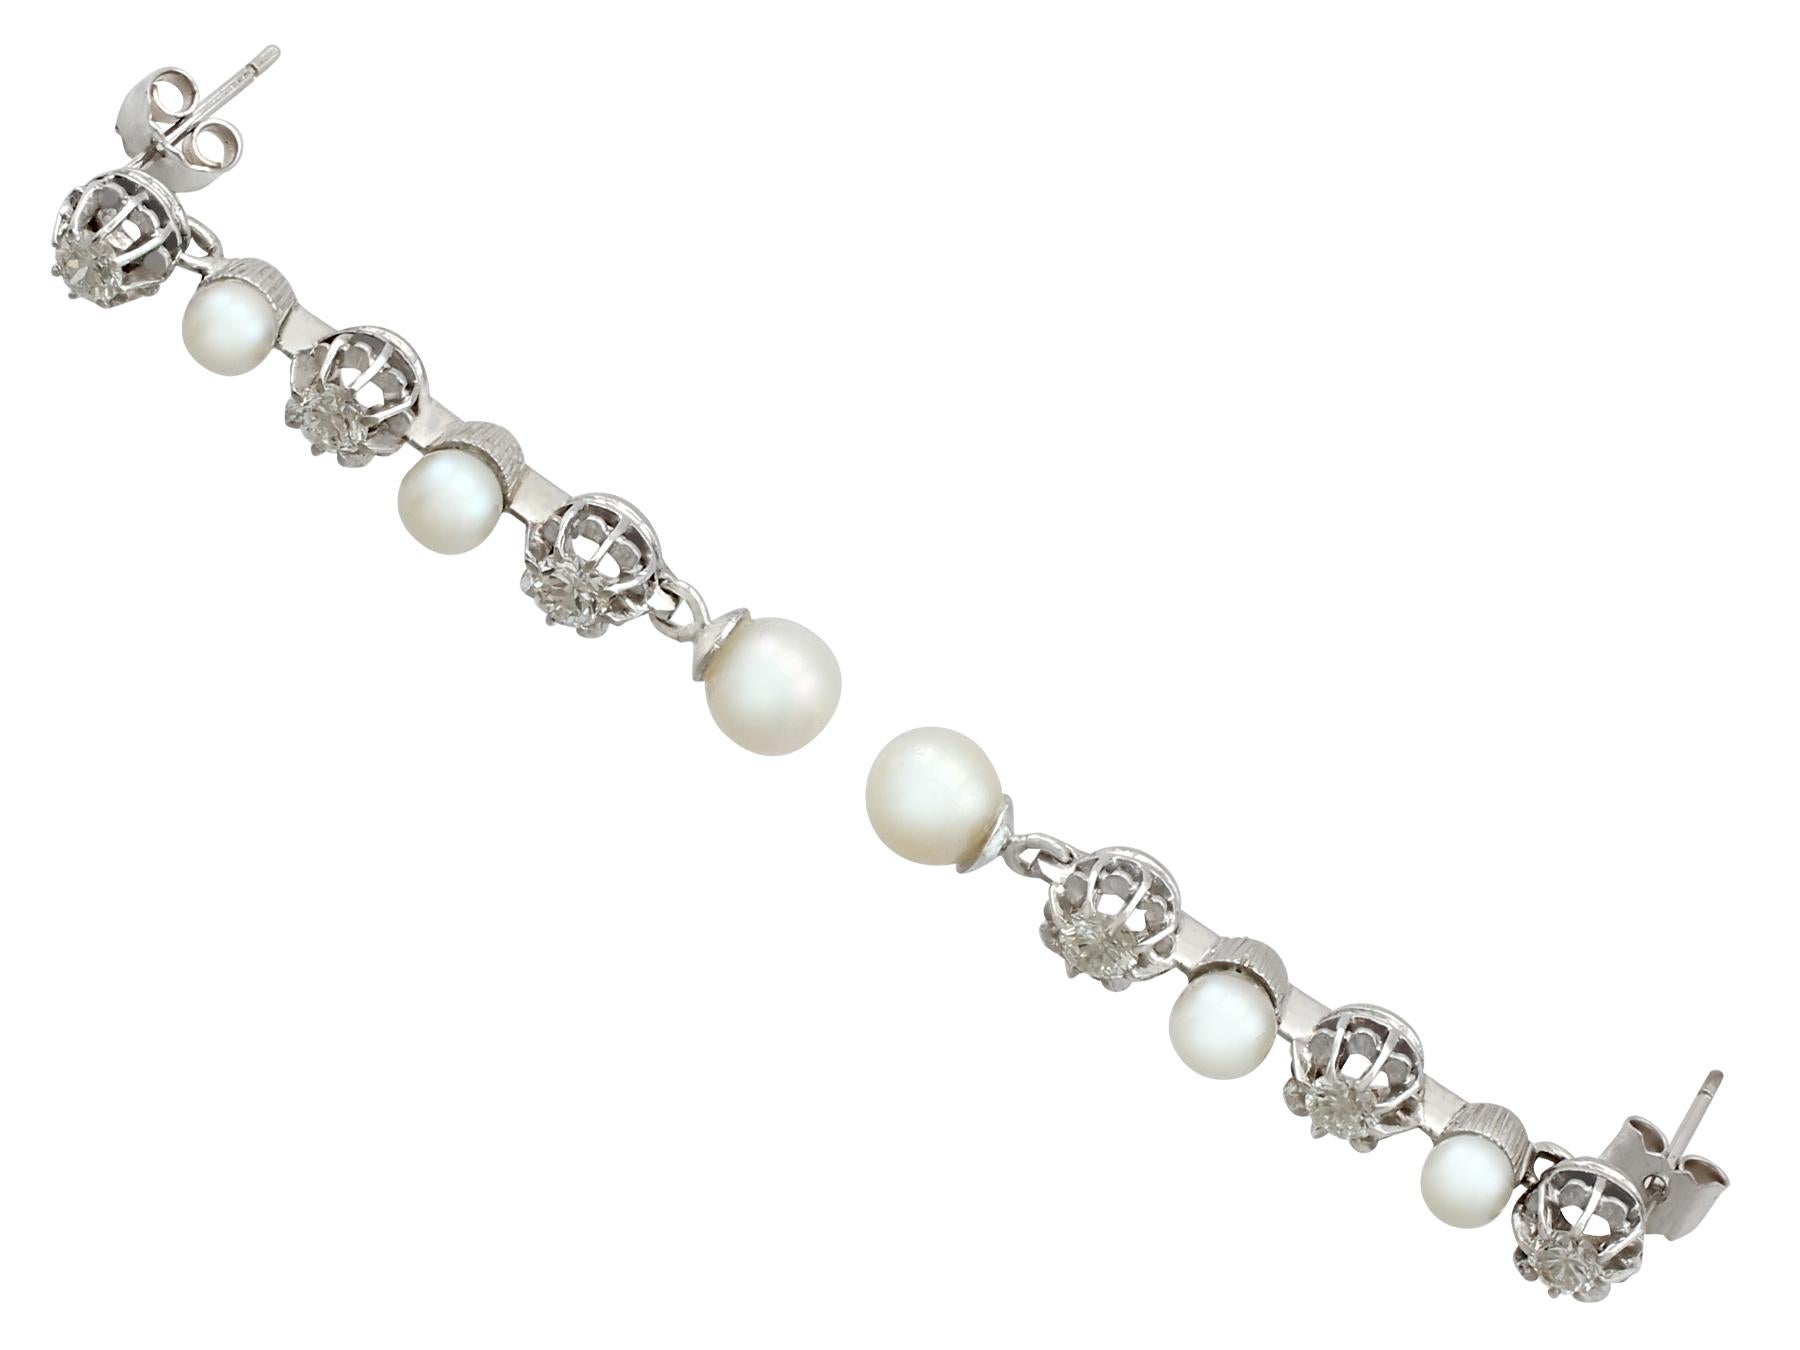 An impressive pair of vintage cultured pearl and 1.09 carat diamond, 9 karat white gold drop earrings; part of our diverse pearl jewelry and estate jewelry collections.

These fine and impressive vintage earrings have been crafted in 9k white